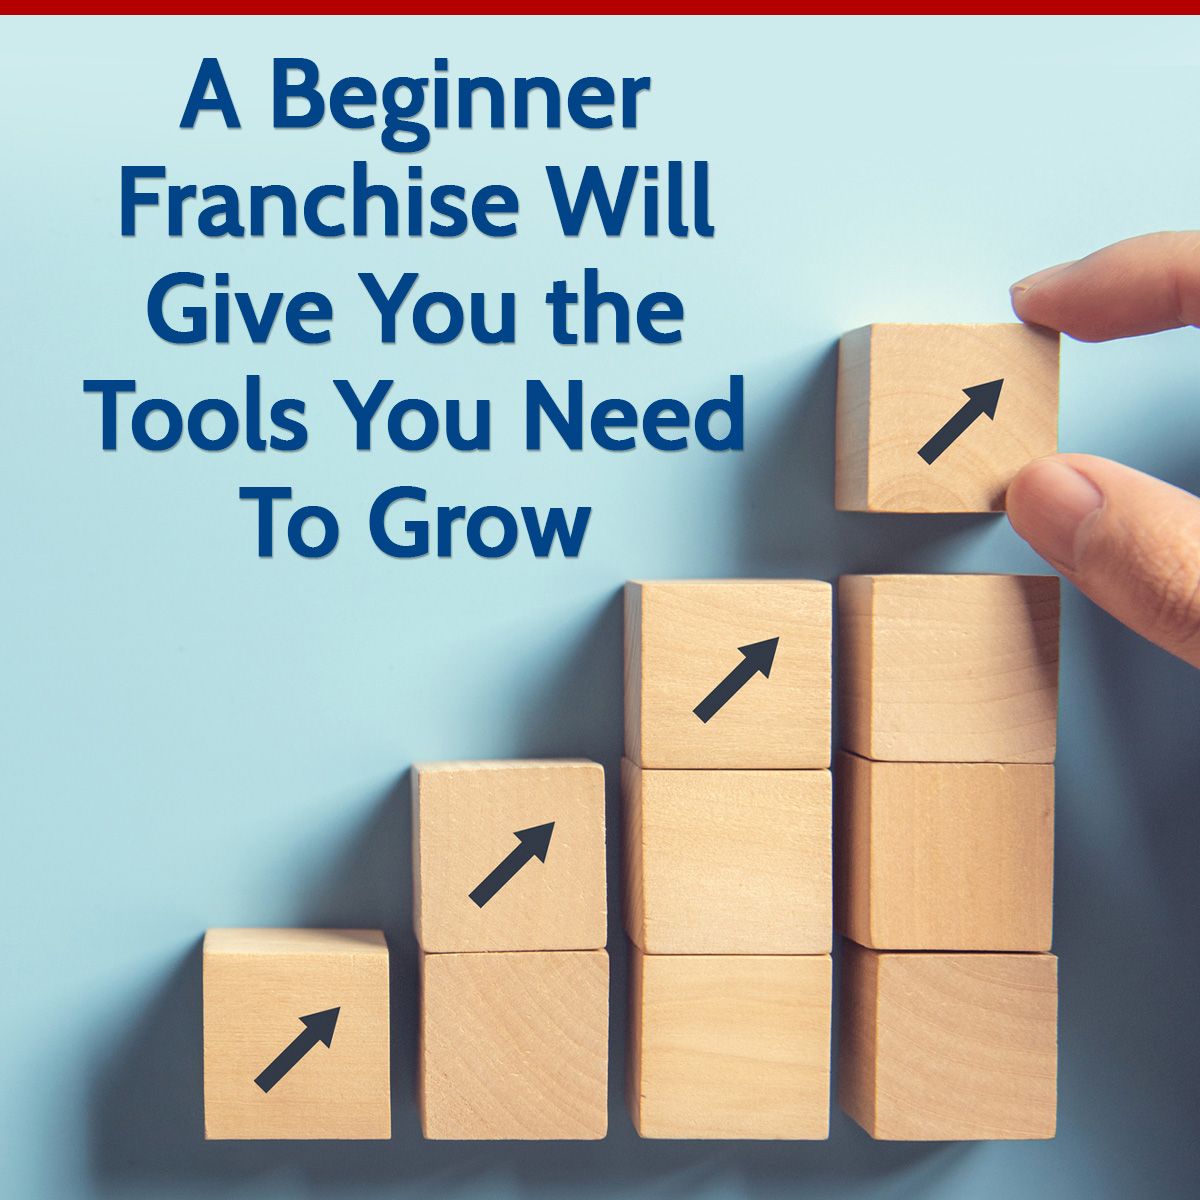 A Beginner Franchise Will Give You the Tools You Need To Grow